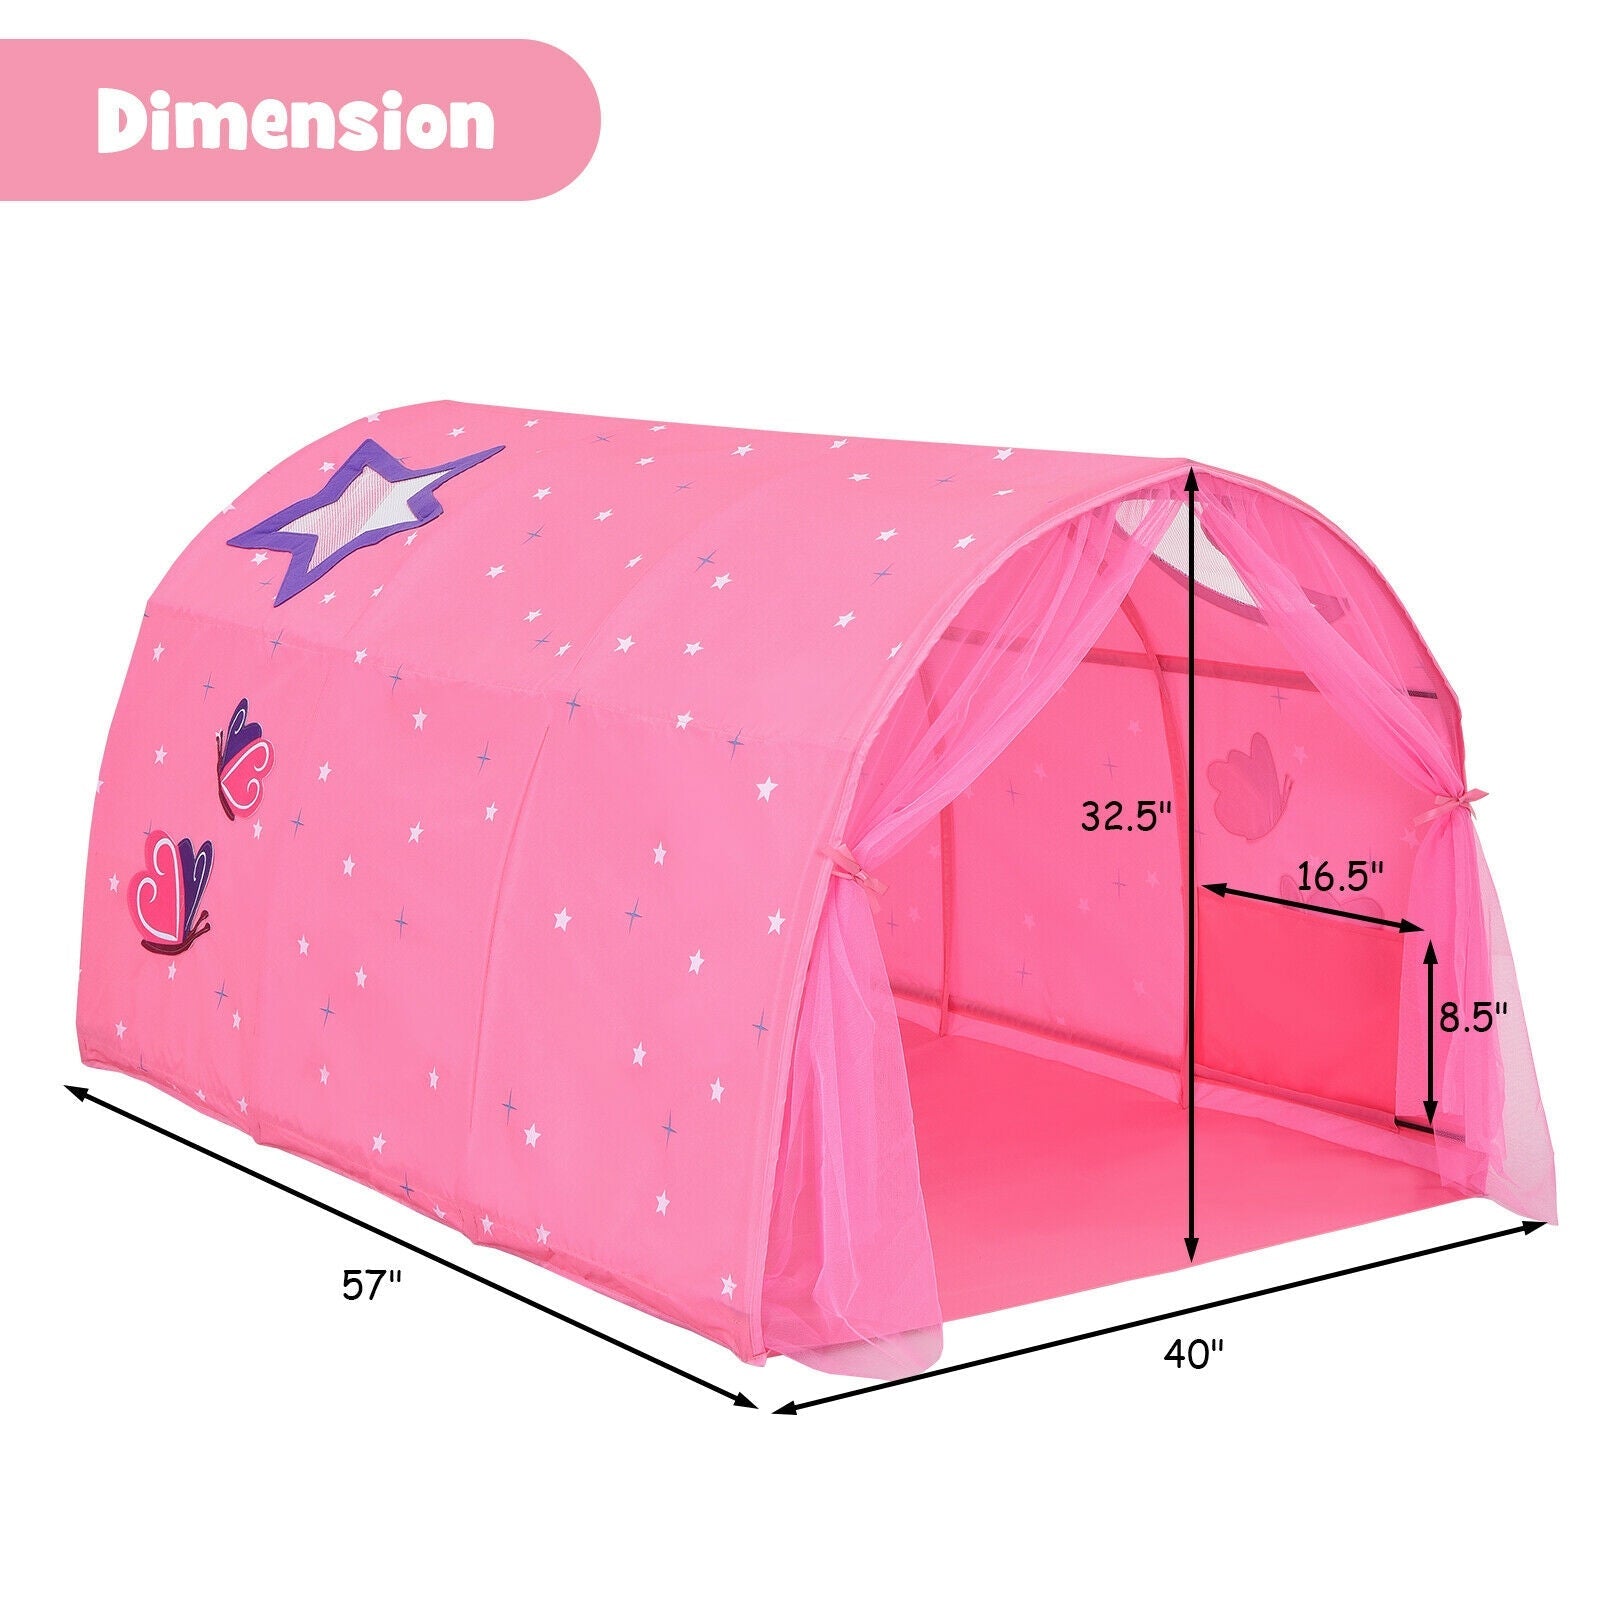 Kids Galaxy Starry Sky Dream Portable Kids Bed Play Tent with Double Net Curtain